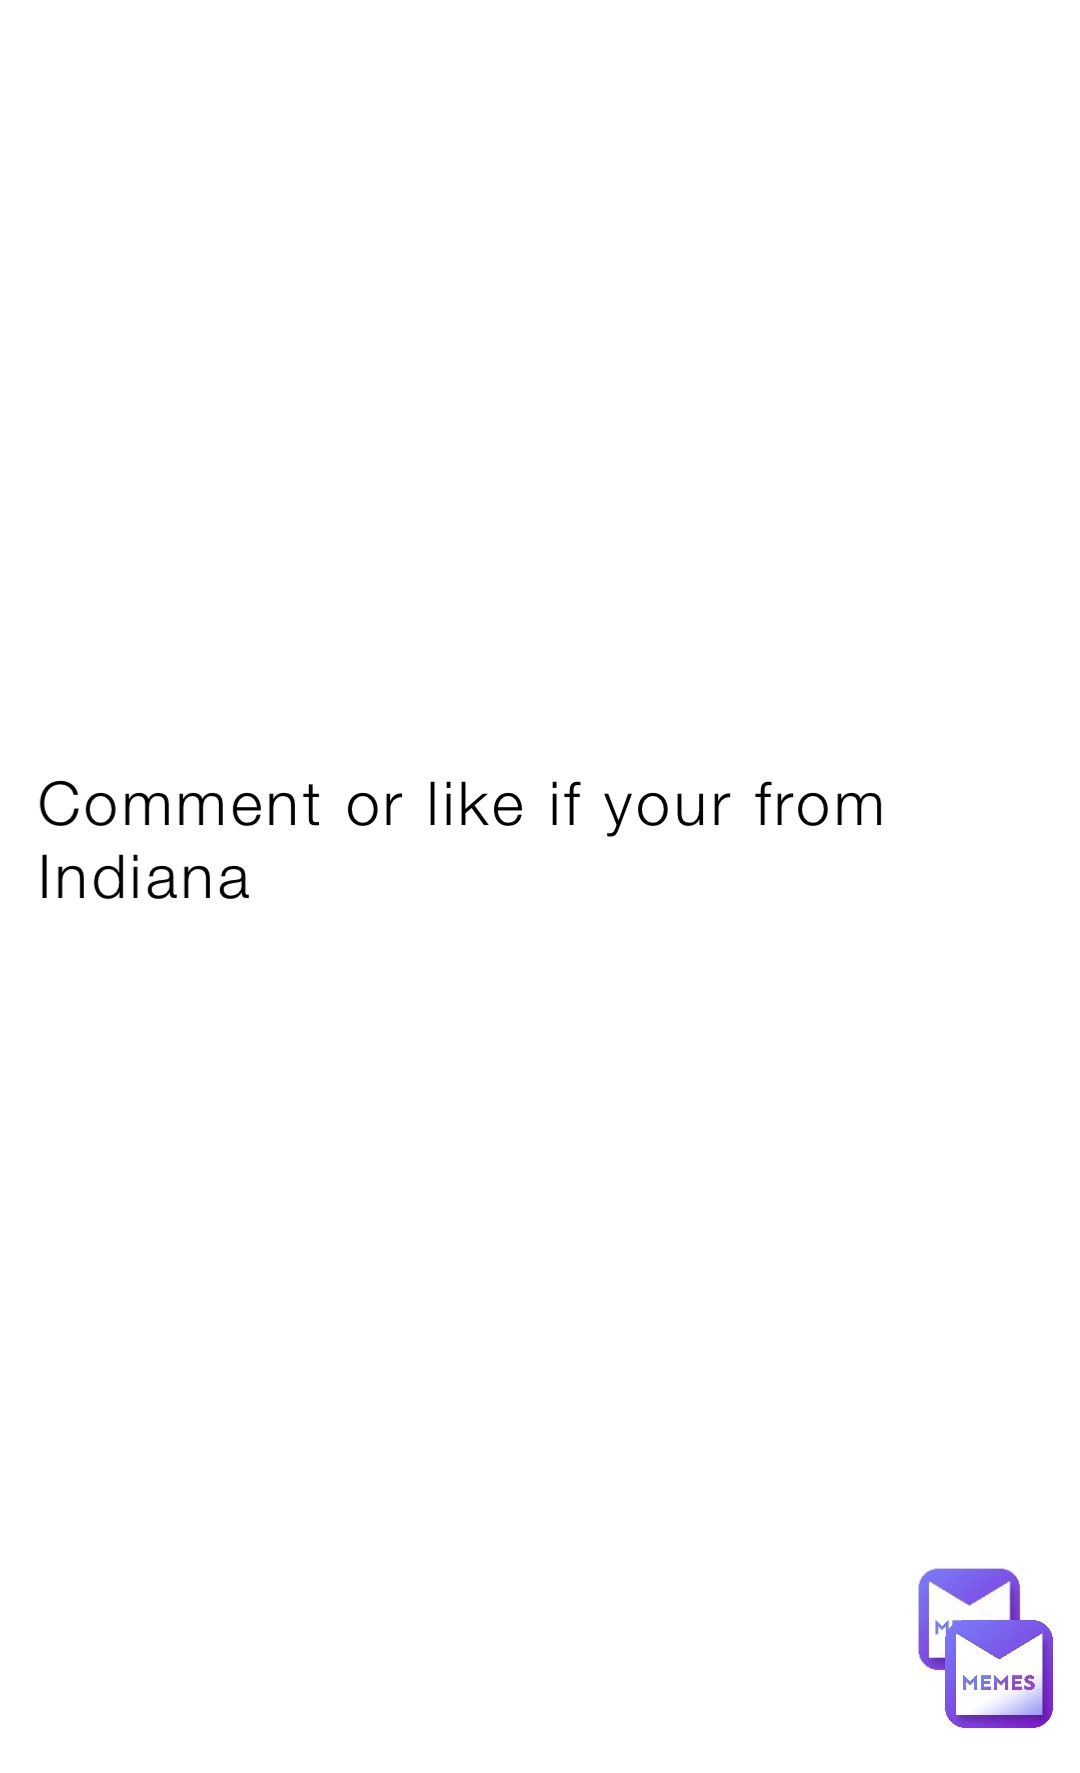 Comment or like if your from Indiana